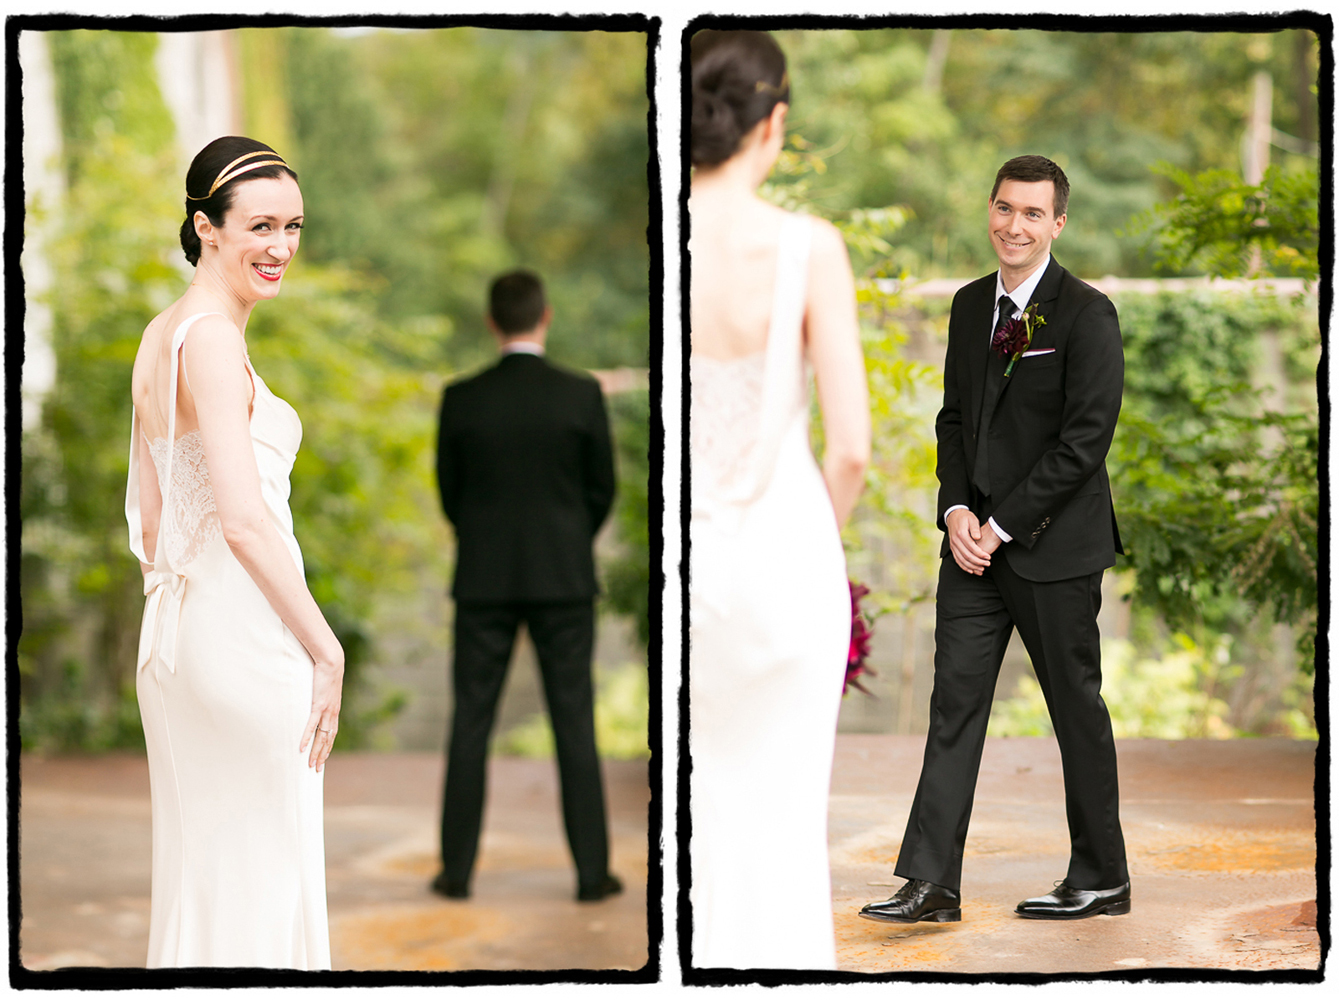 Shannon is excited for her groom to see her dress at The Roundhouse at Beacon Falls.